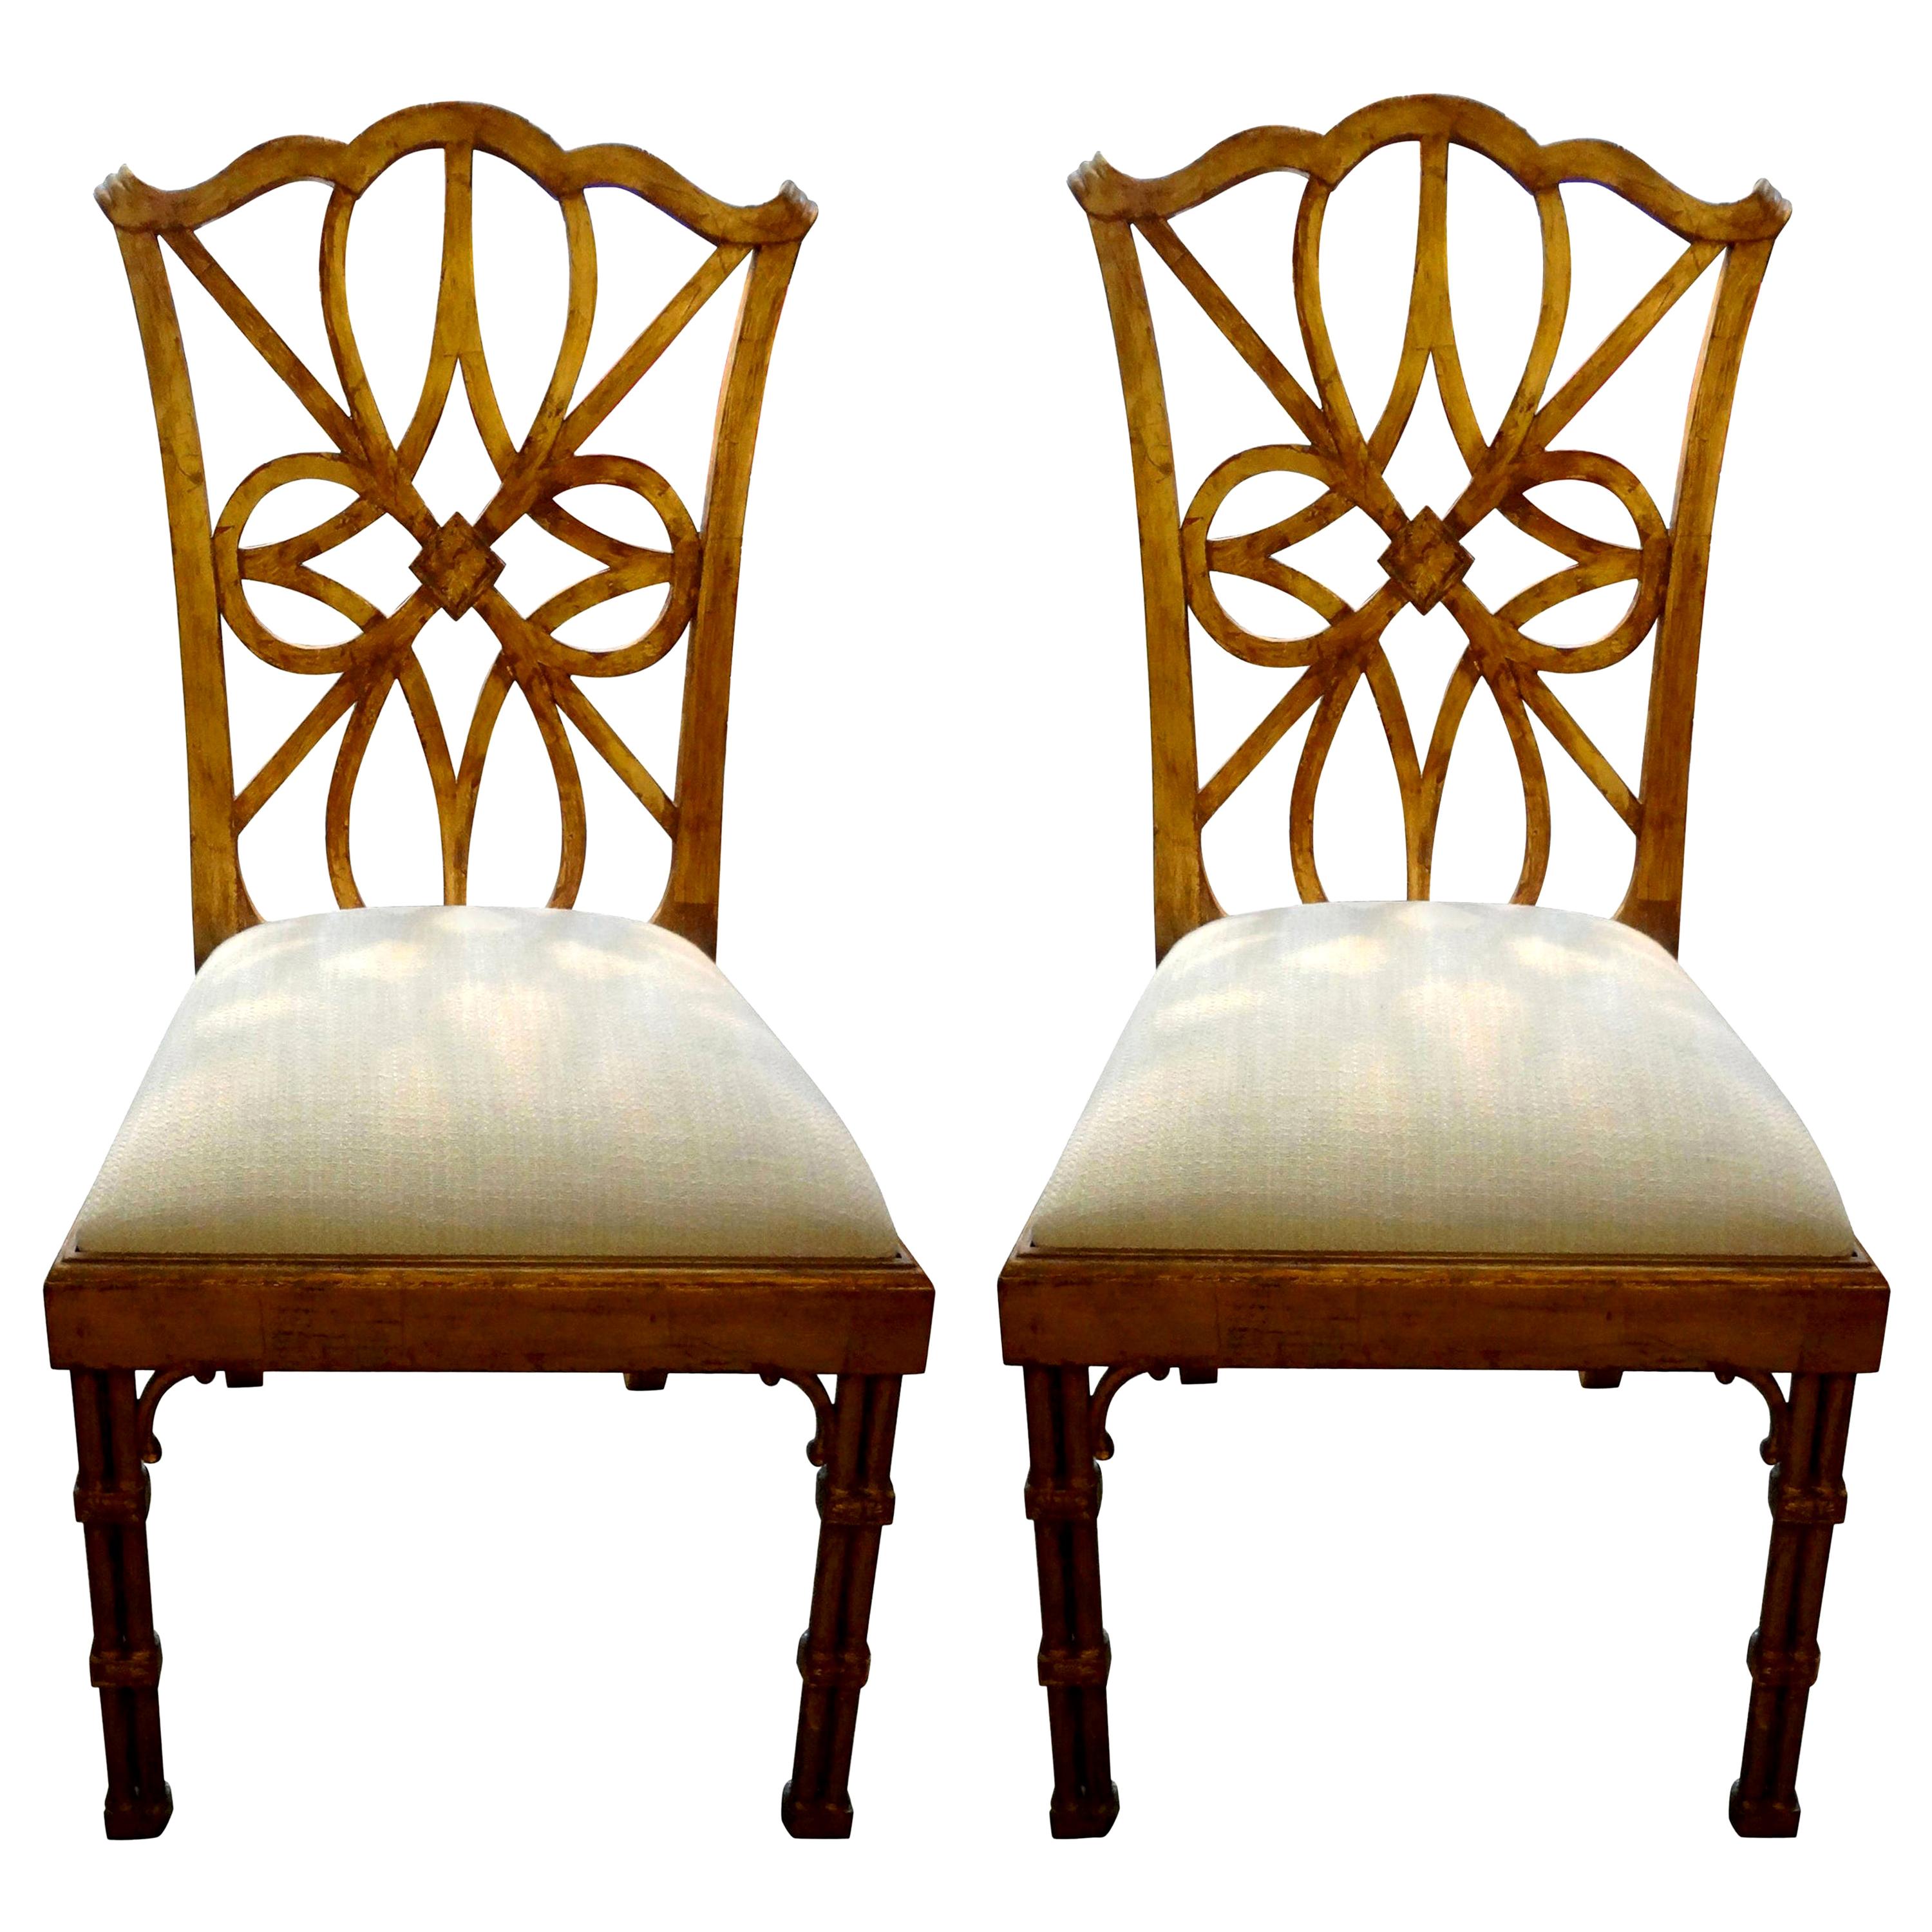 Pair of Chinese Chippendale or Chinoiserie Style Giltwood Chairs